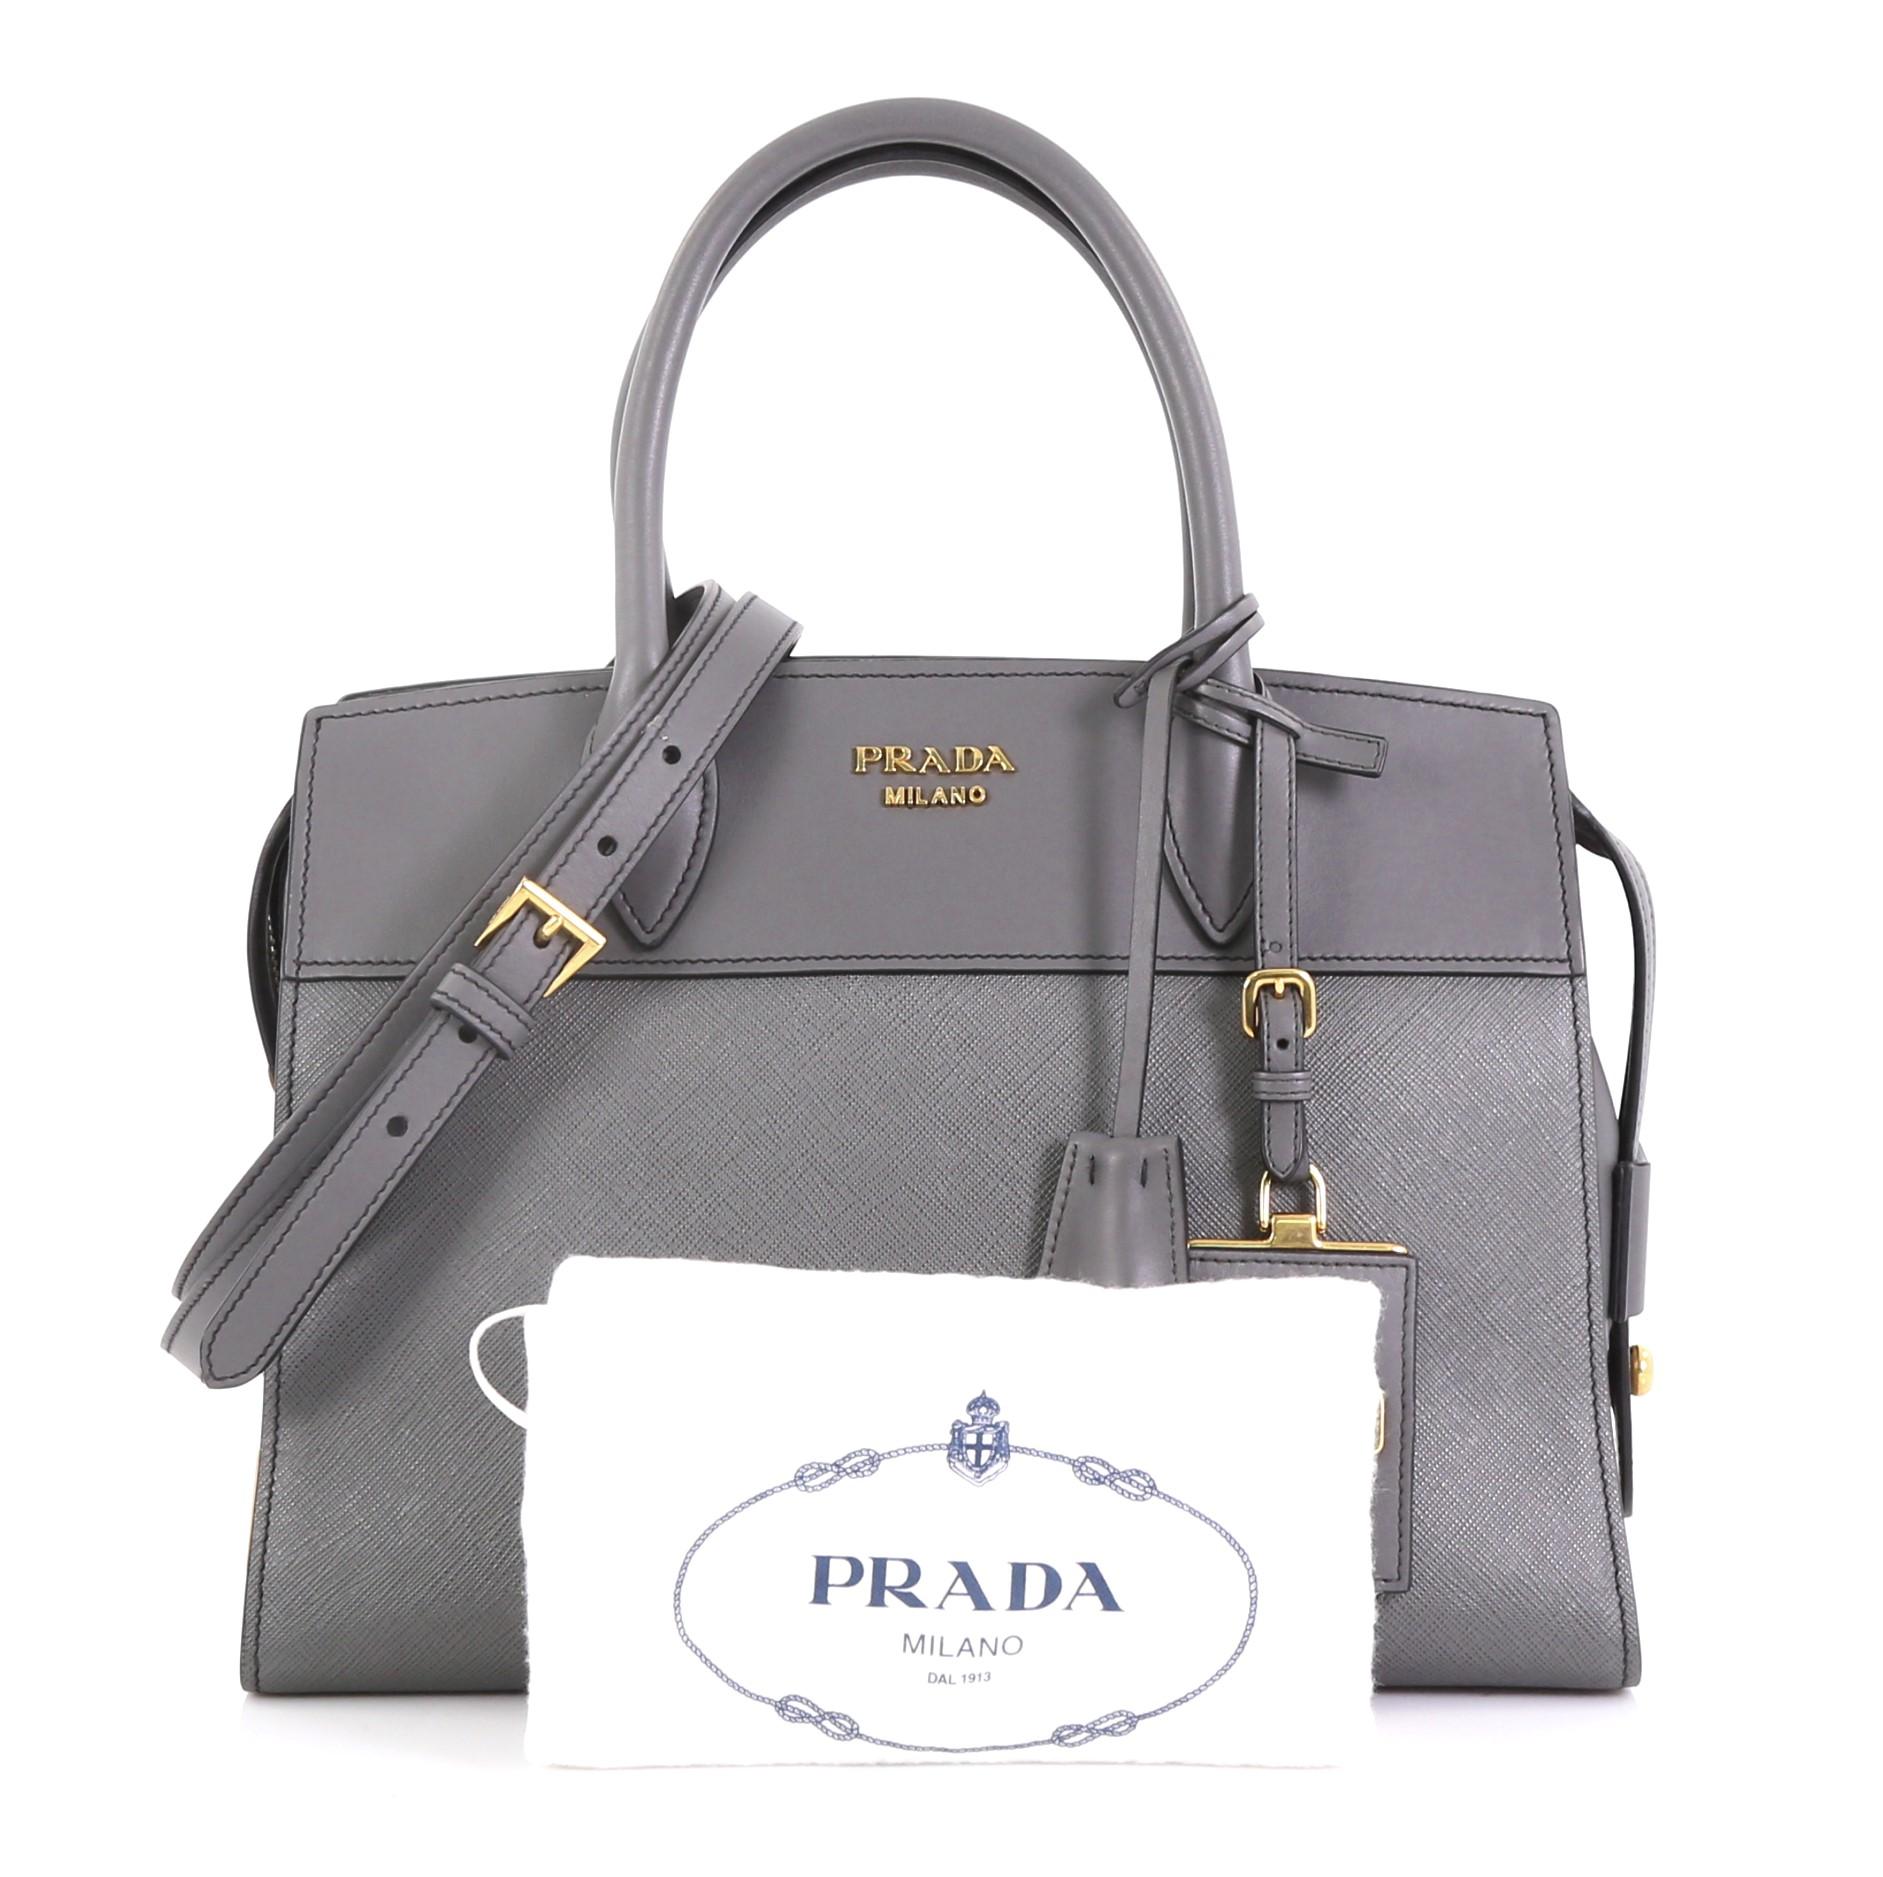 This Prada Esplanade Bag Saffiano Leather Medium, crafted from gray saffiano leather, features dual rolled leather handles, signature Prada logo at top center, and gold-tone hardware. Its zip closure opens to a black fabric interior with zip and